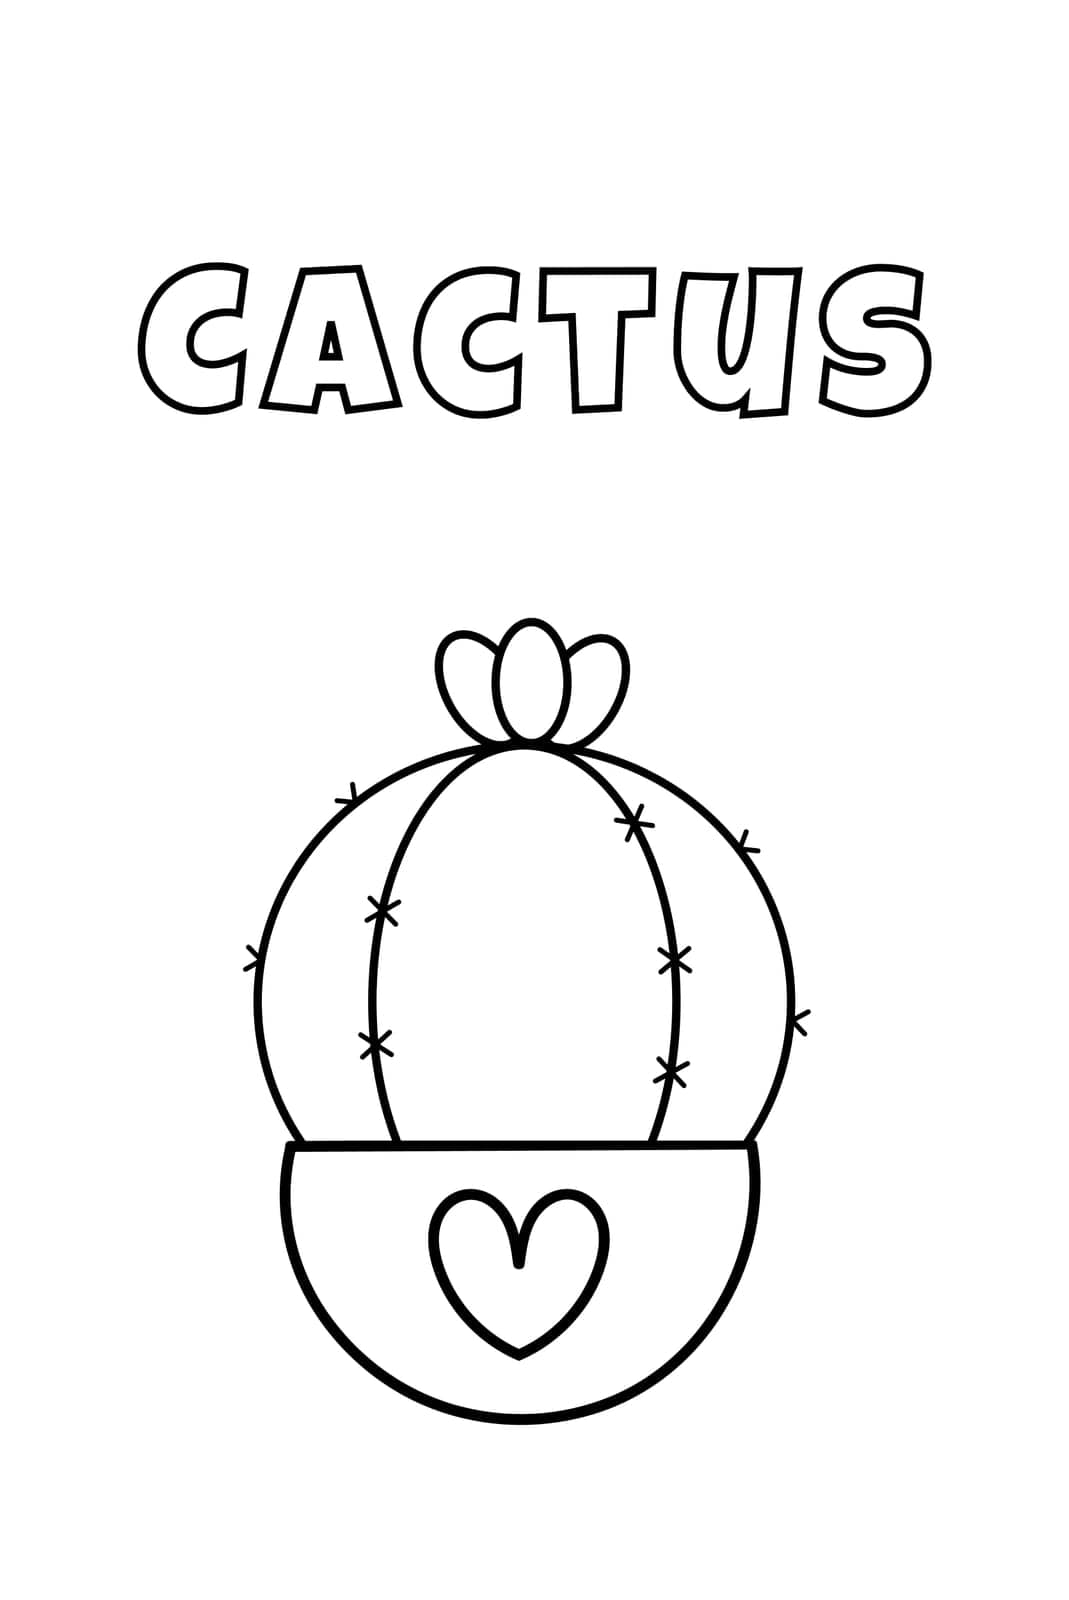 Coloring With Thick Lines For The Little Ones, Cactus Coloring Page